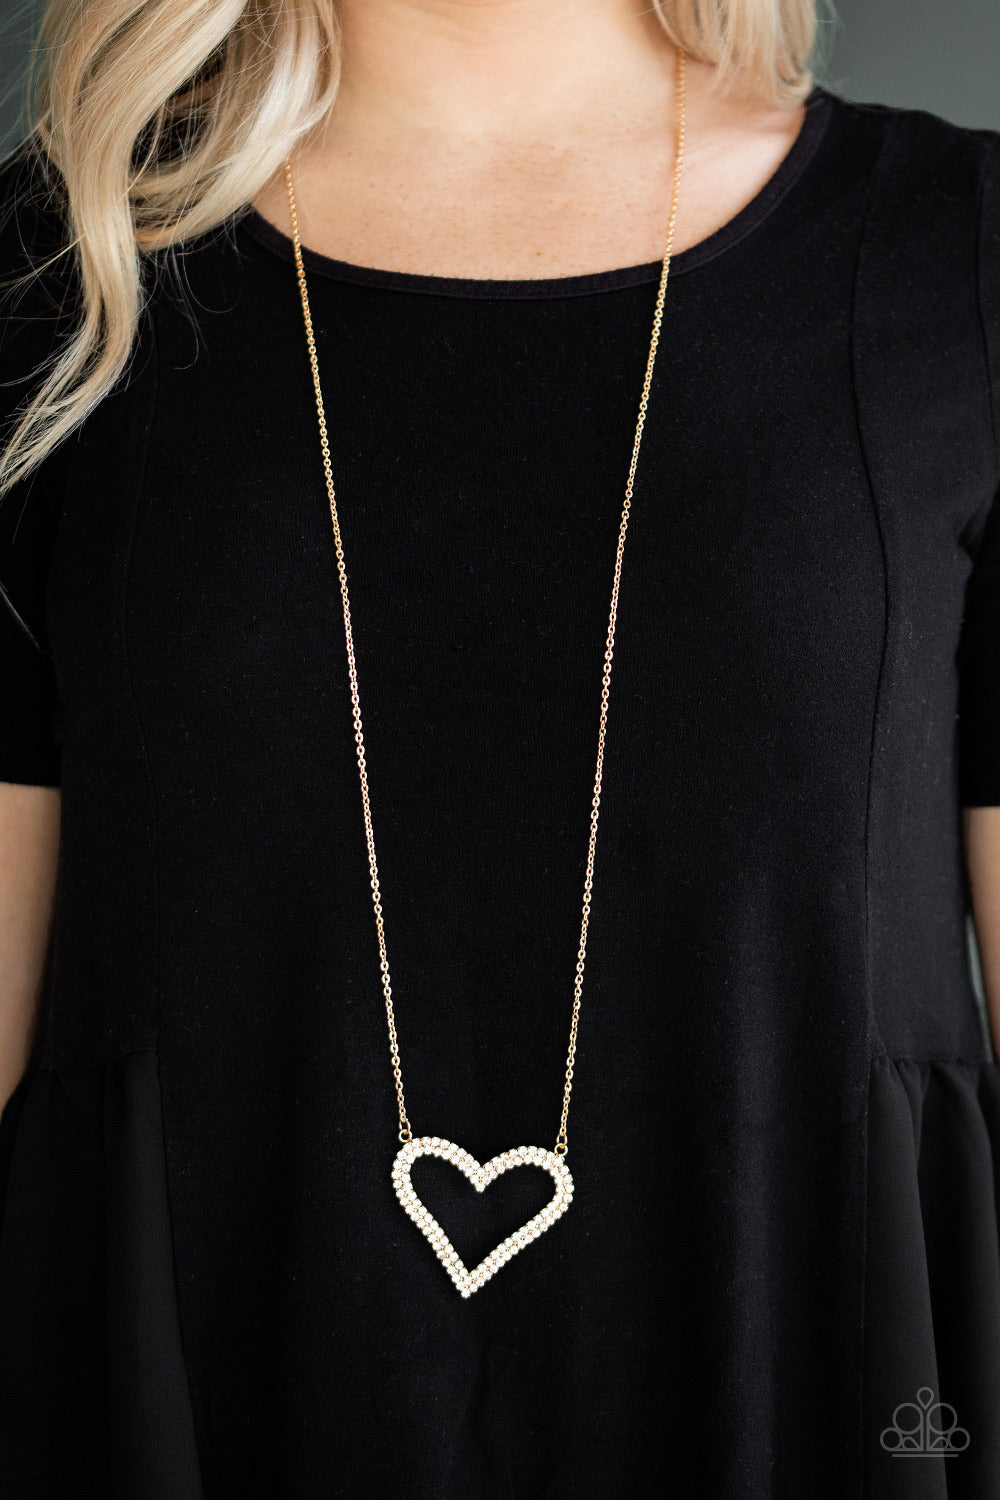 Pull Some HEART-strings Gold-Necklace